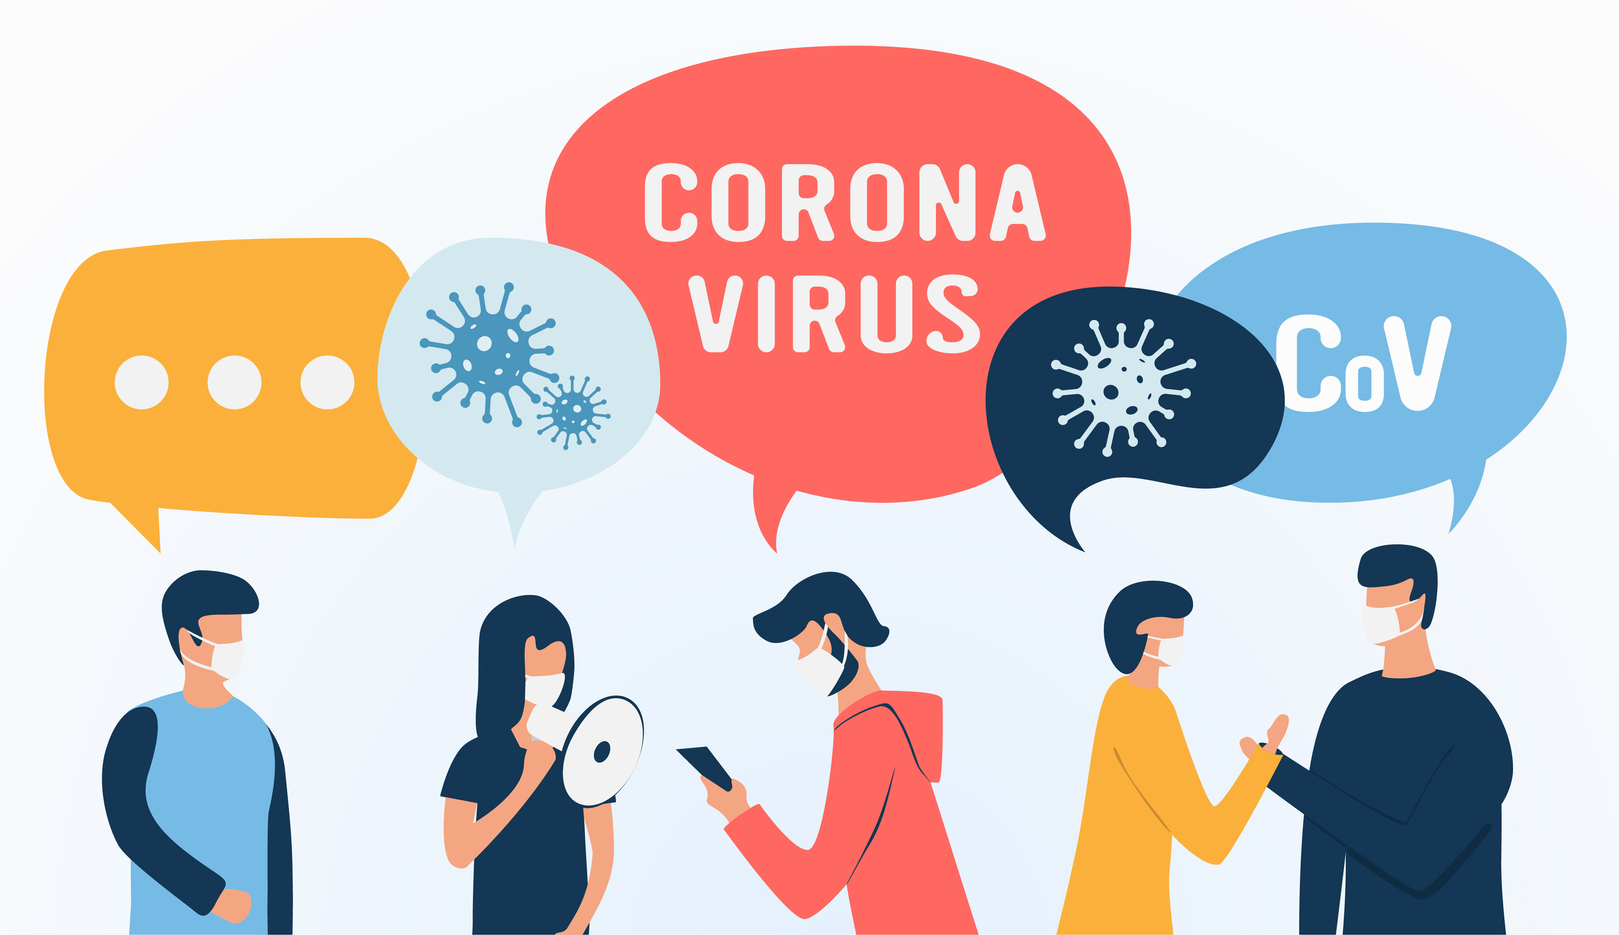 a cartoon of people wearing face masks with various speech bubbles that have images of a virus, the word coronavirus, and CoV